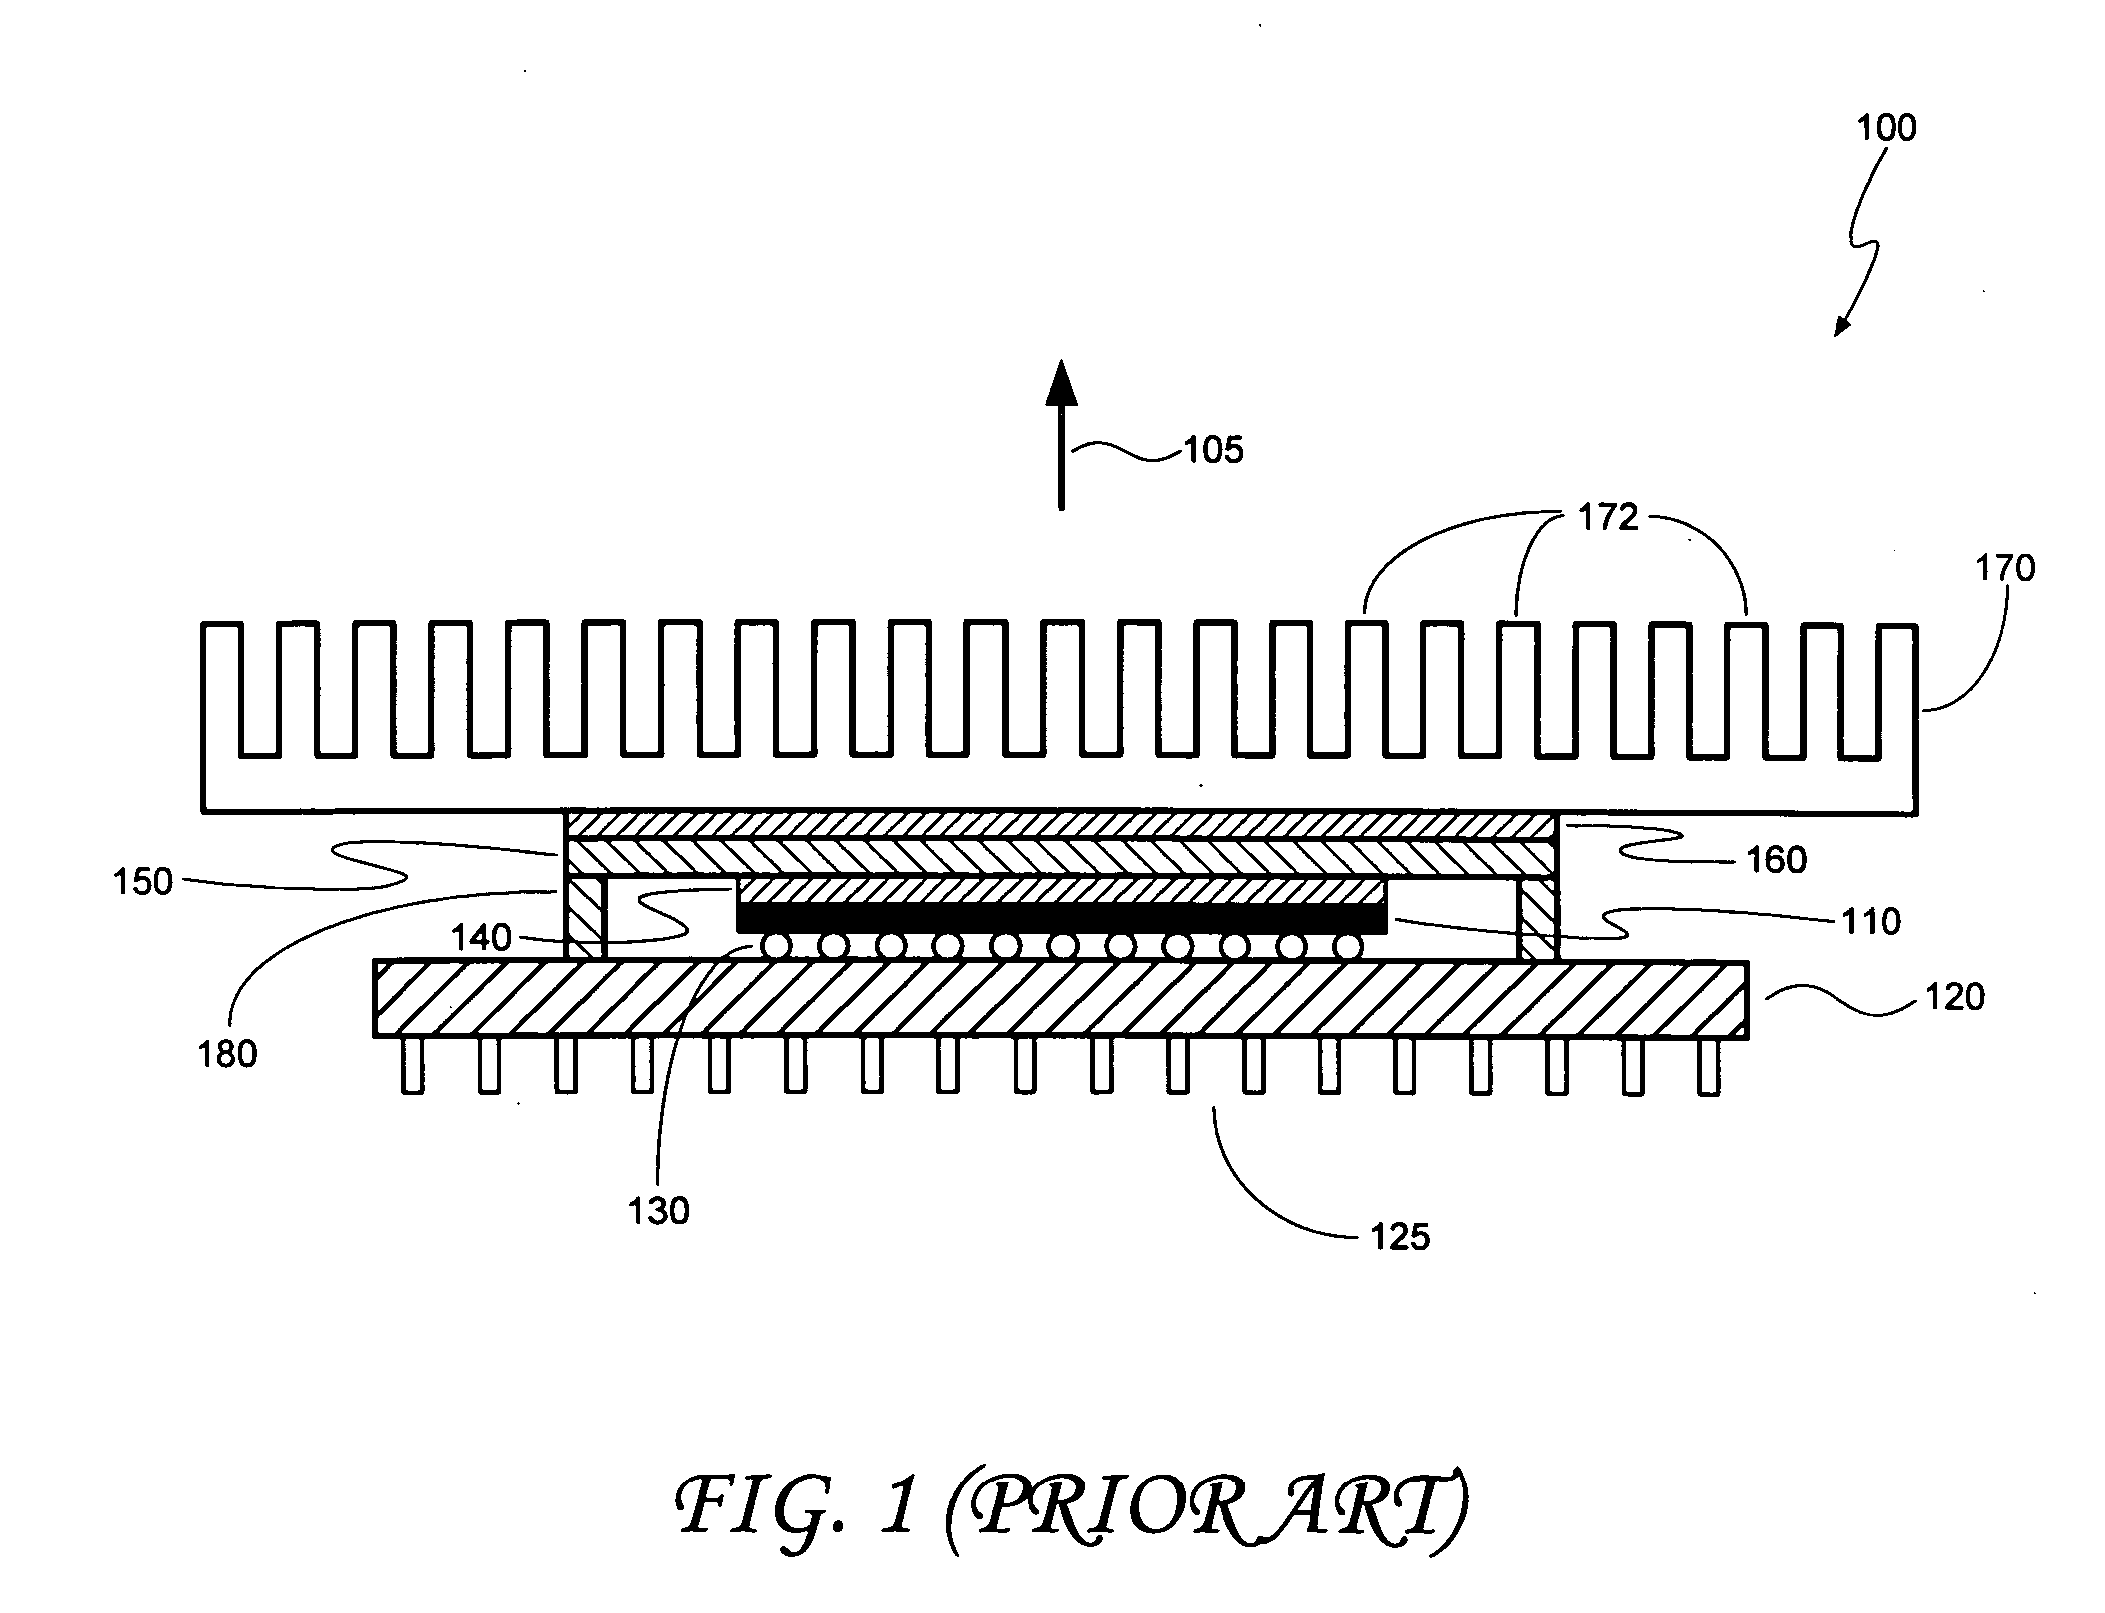 System and method for cooling an integrated circuit device by electromagnetically pumping a fluid